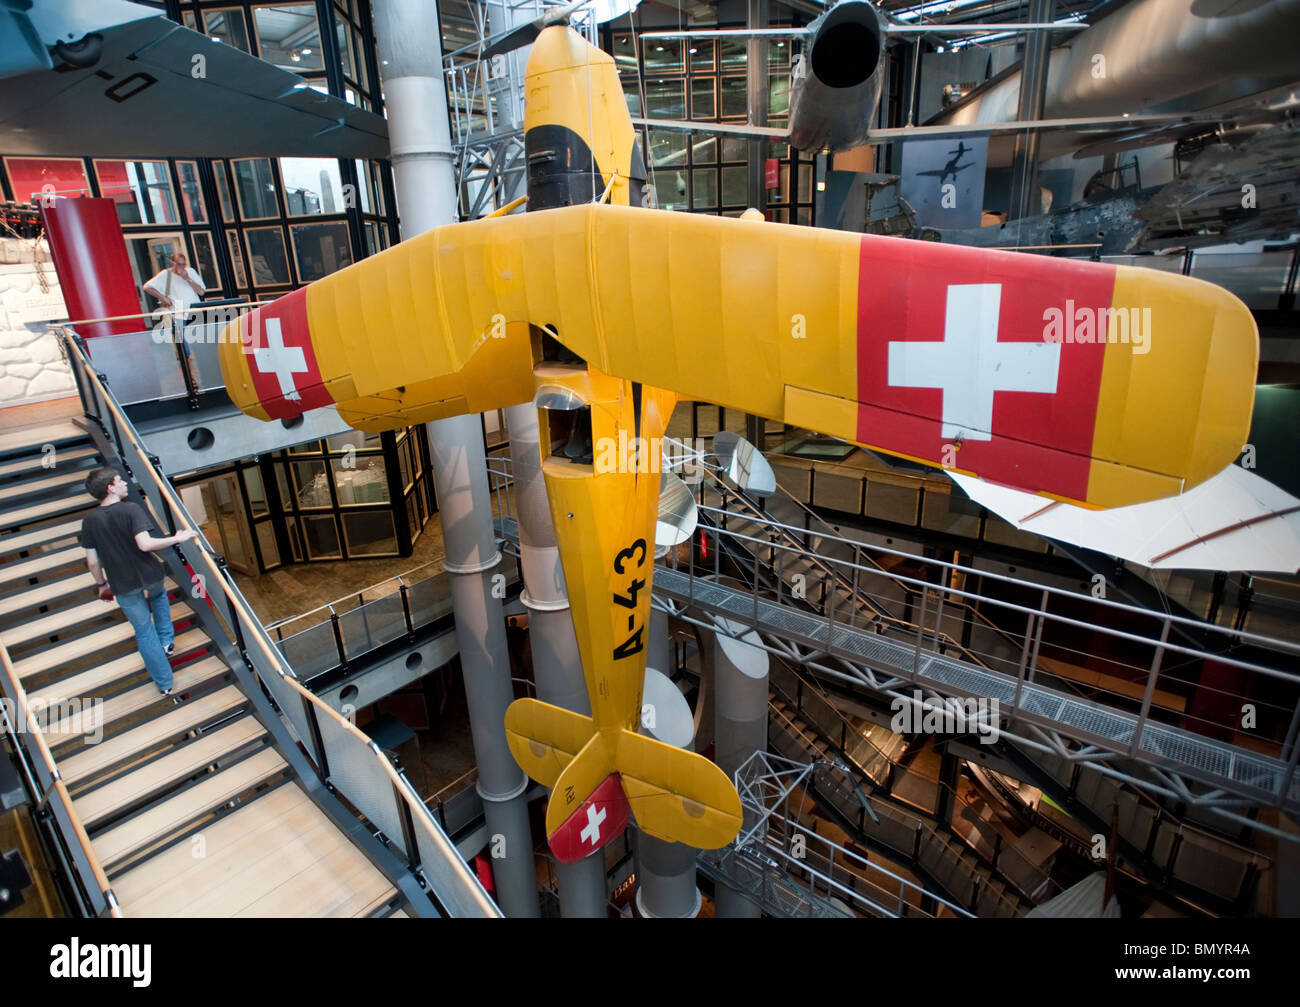 Historic aircraft on display at Deutsches Technikmuseum or German Technology Museum in Berlin Germany Stock Photo